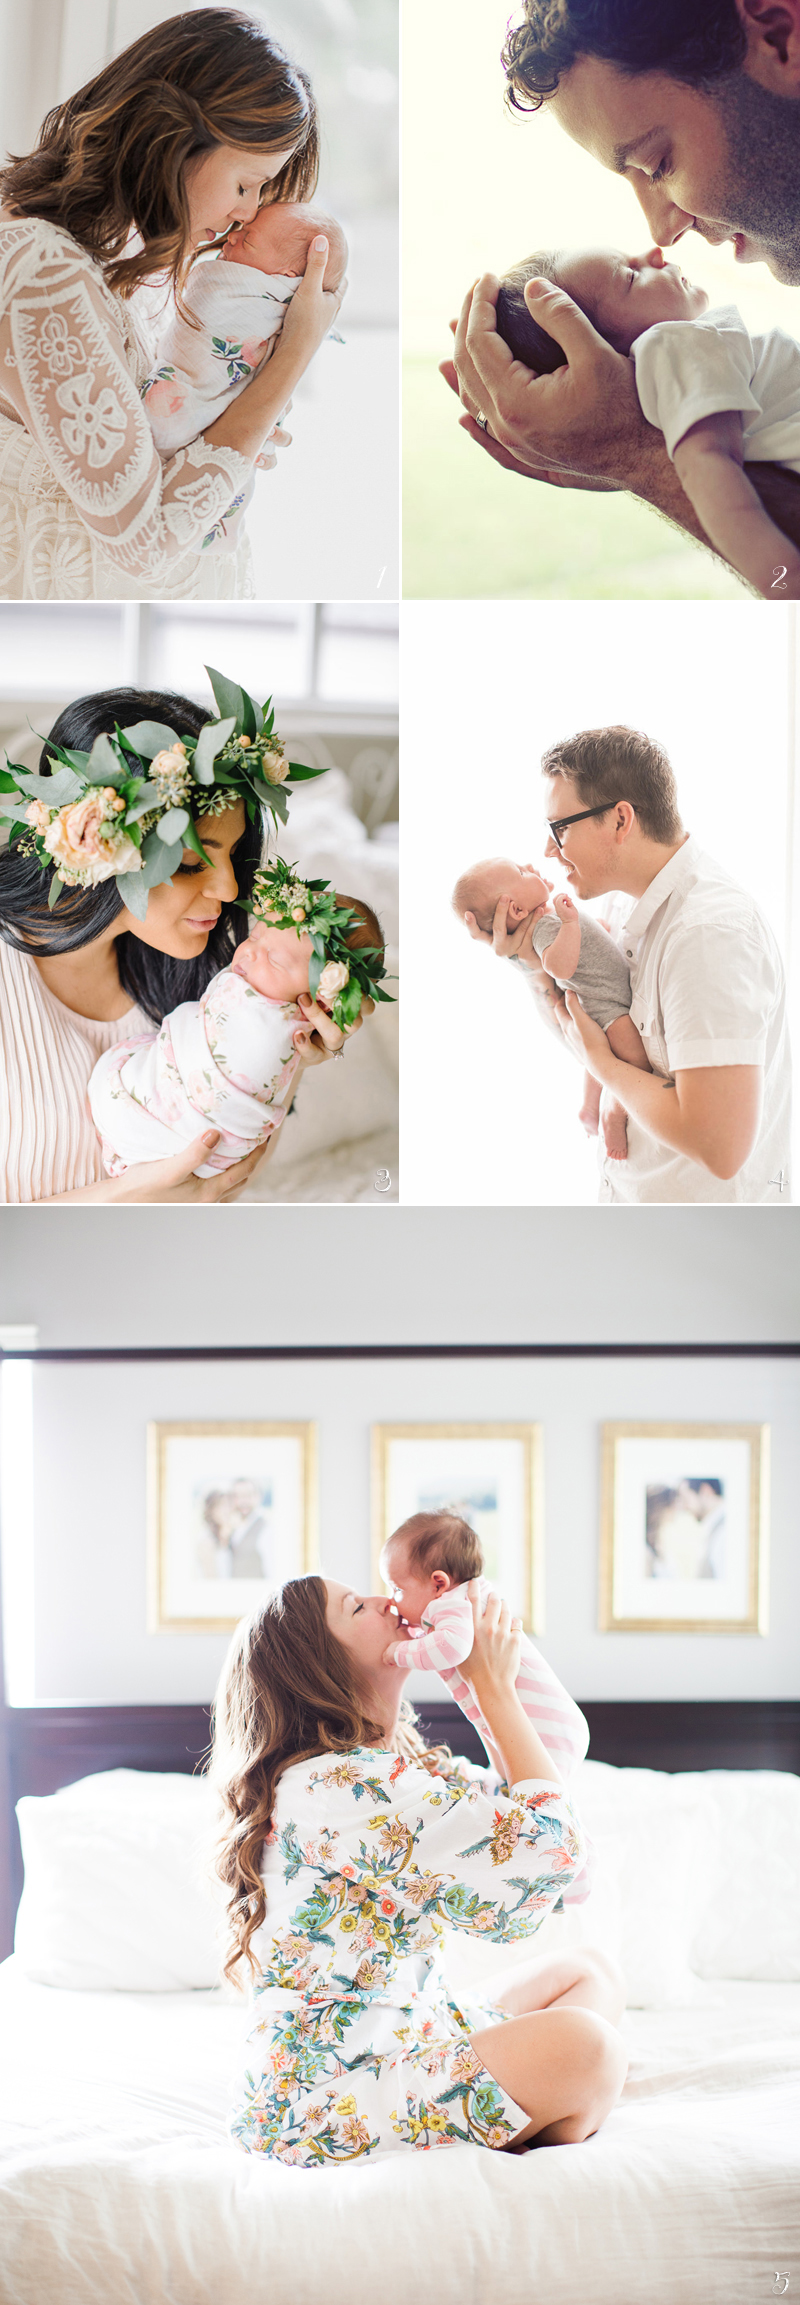 Newborn and Baby Photography Jargon Buster | A Parent's Guide